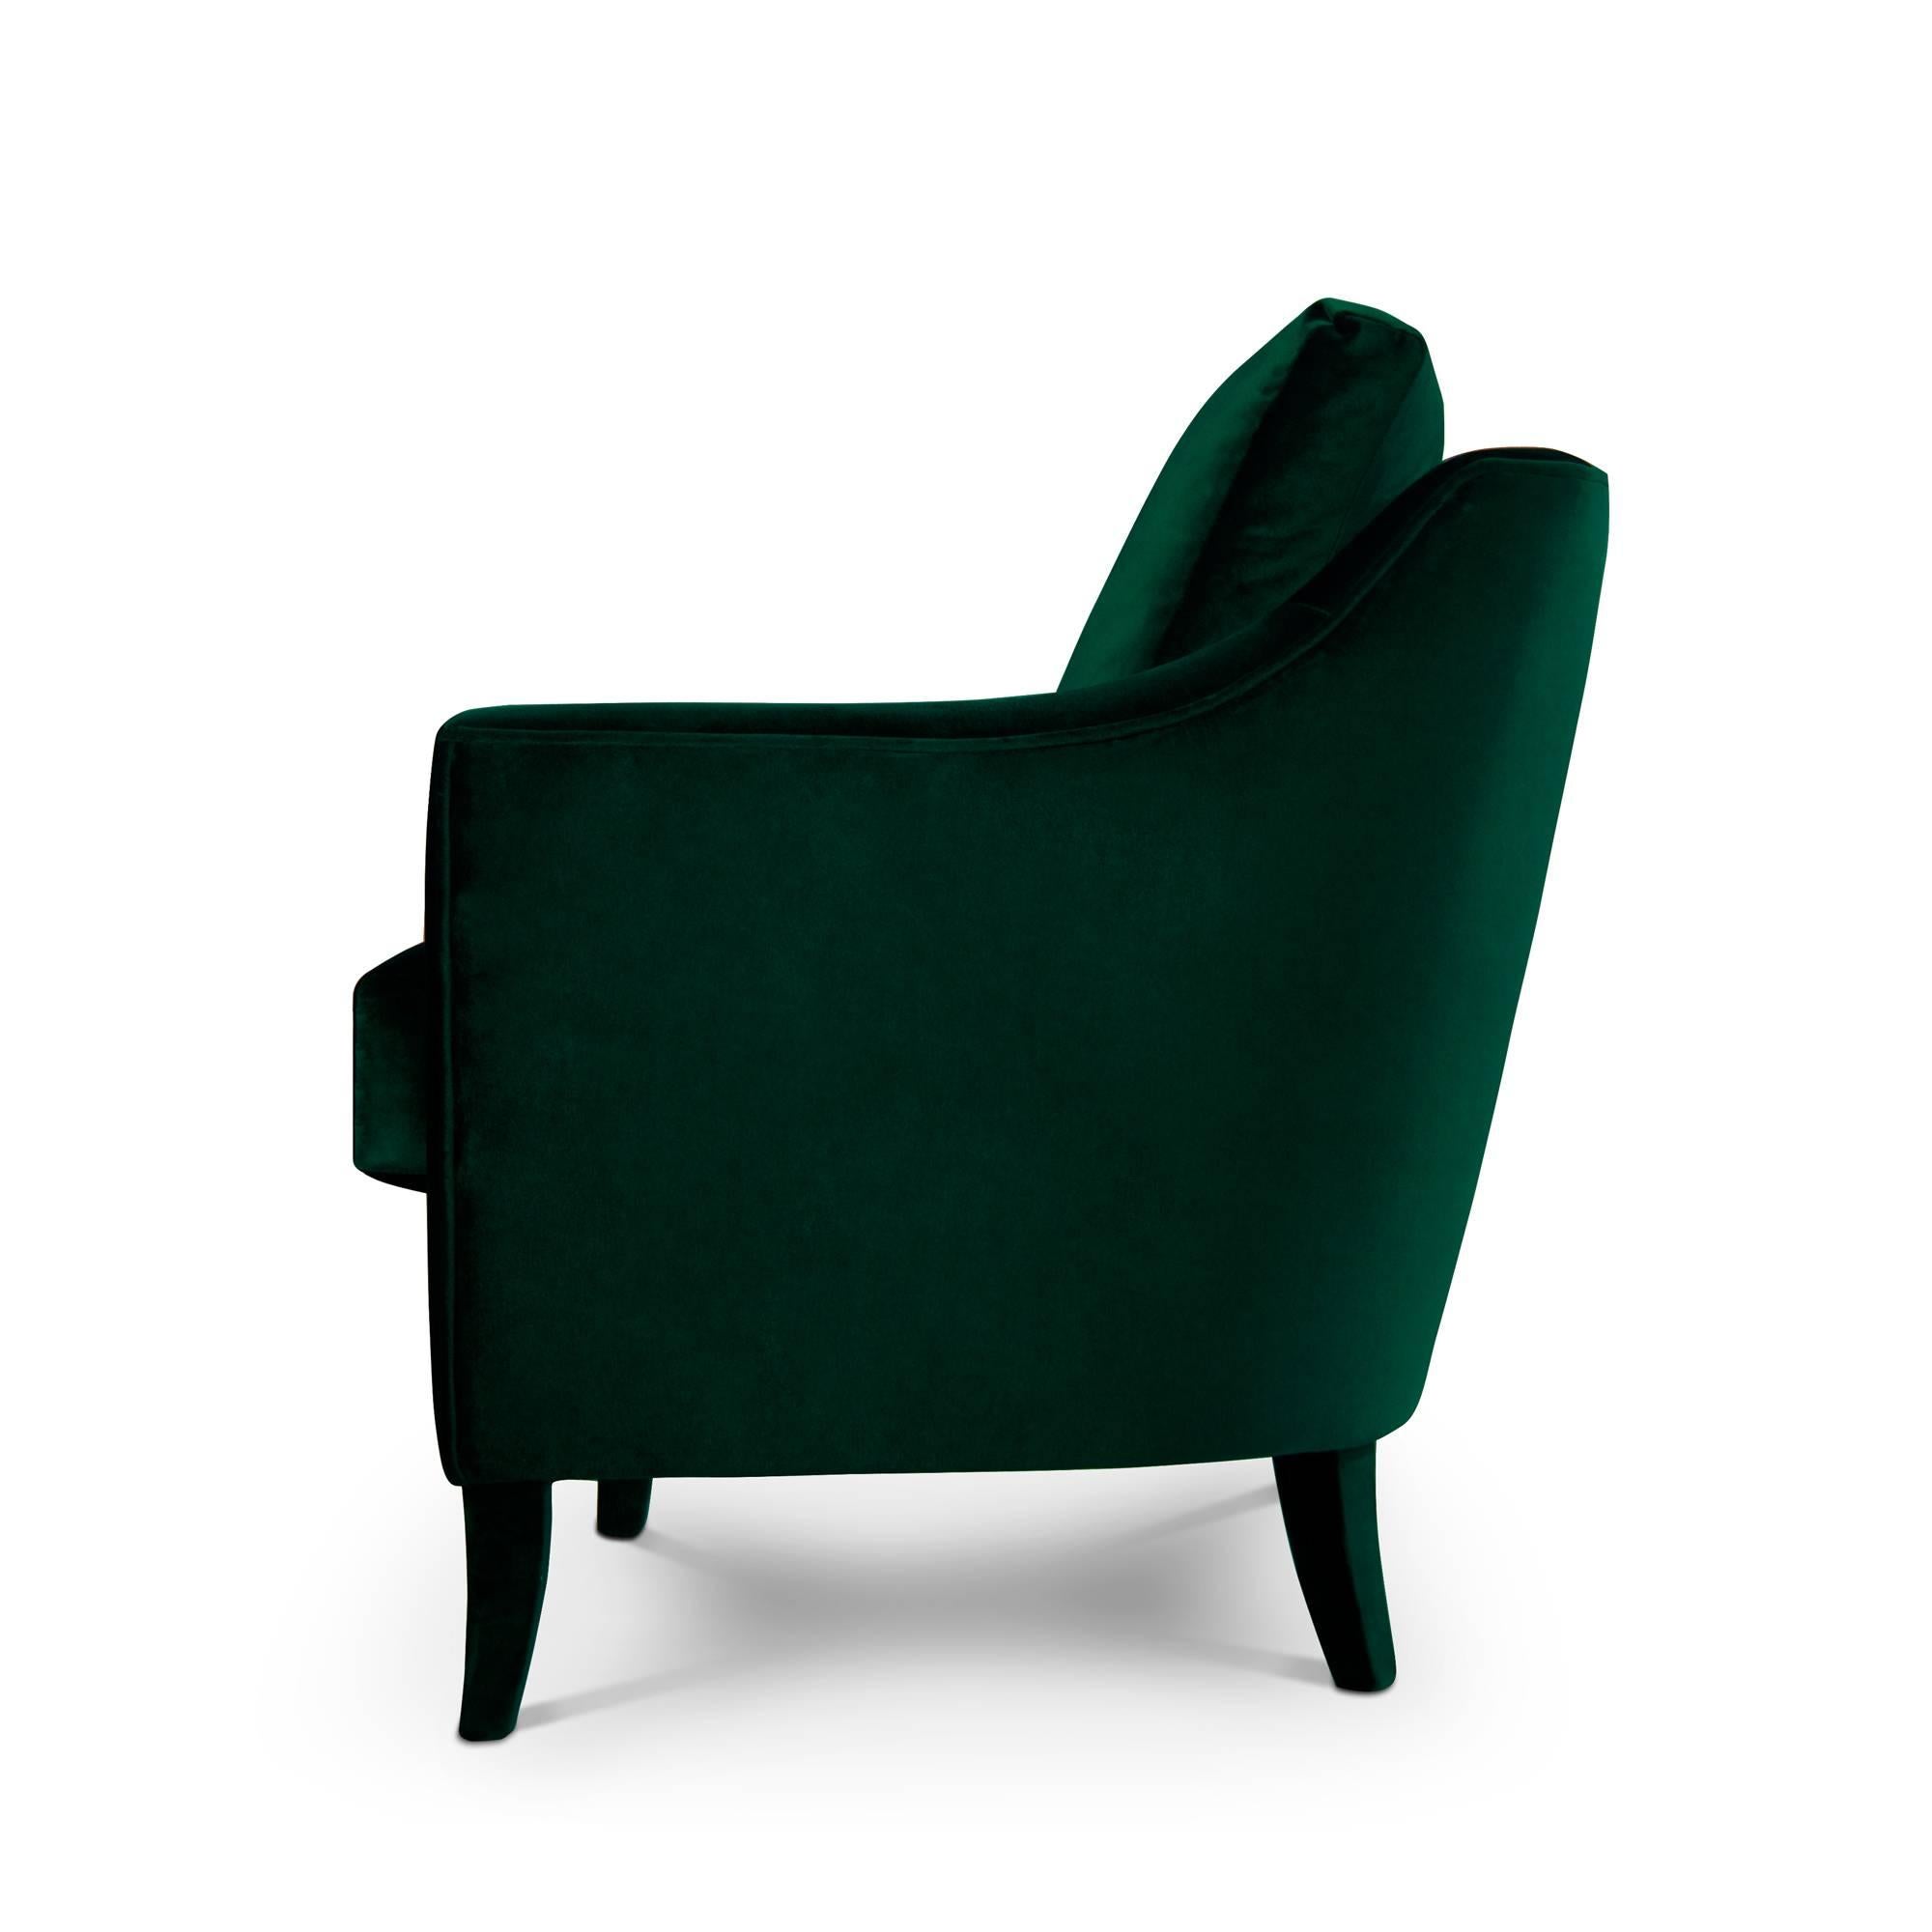 Armchair British Grenn with solid wood structure
and covered with cotton velvet fabric. Fully upholstery
armchair. Also available in british green long chair.
Also available with others fabrics on request.